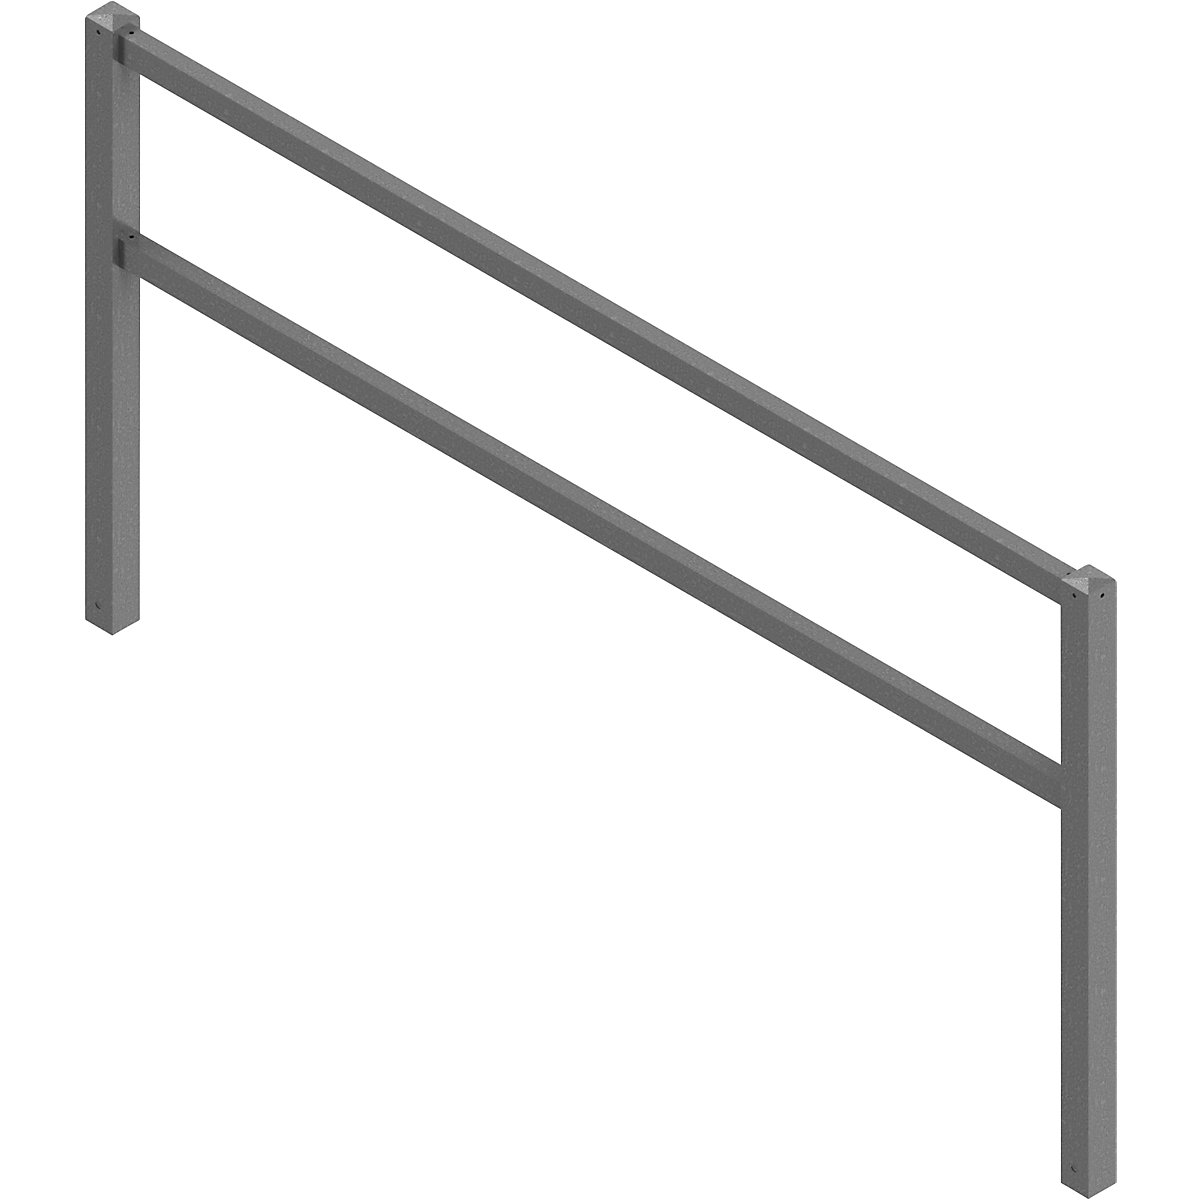 Access barrier, welded, with top rail and knee rail, hot dip galvanised, width 2500 mm-4